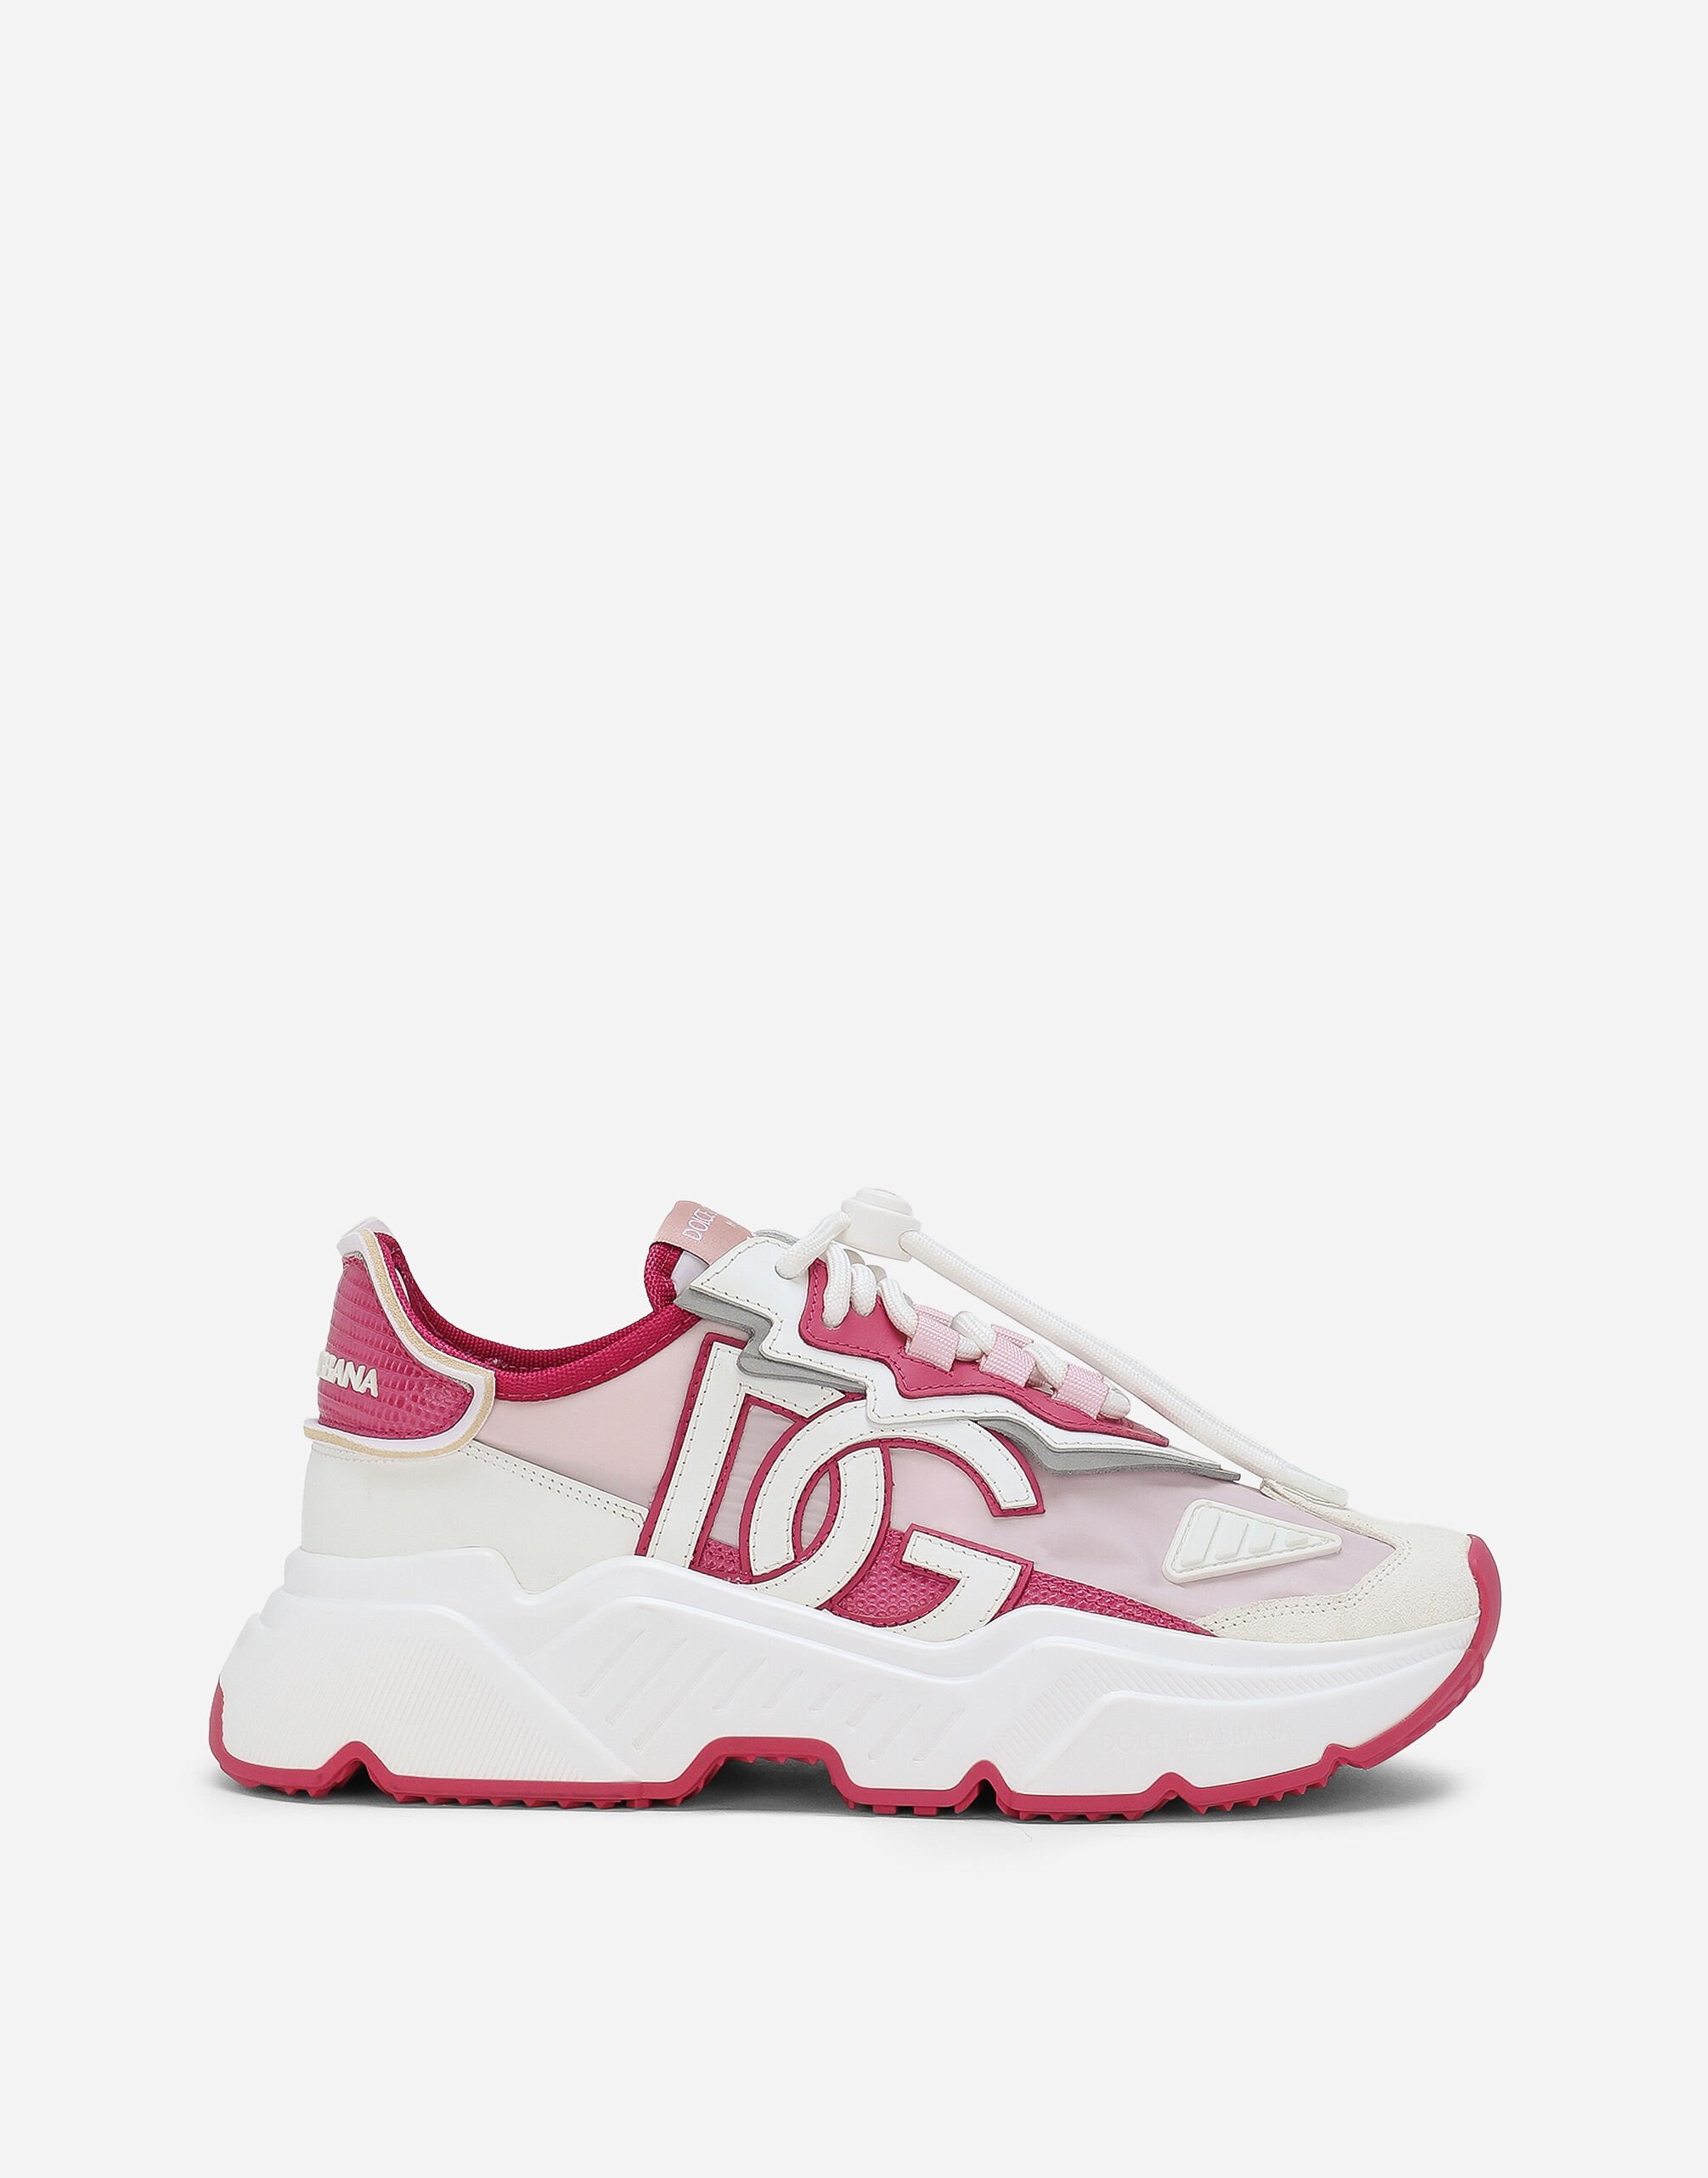 ${brand} Sneaker Daymaster aus Materialmix ${colorDescription} ${masterID}